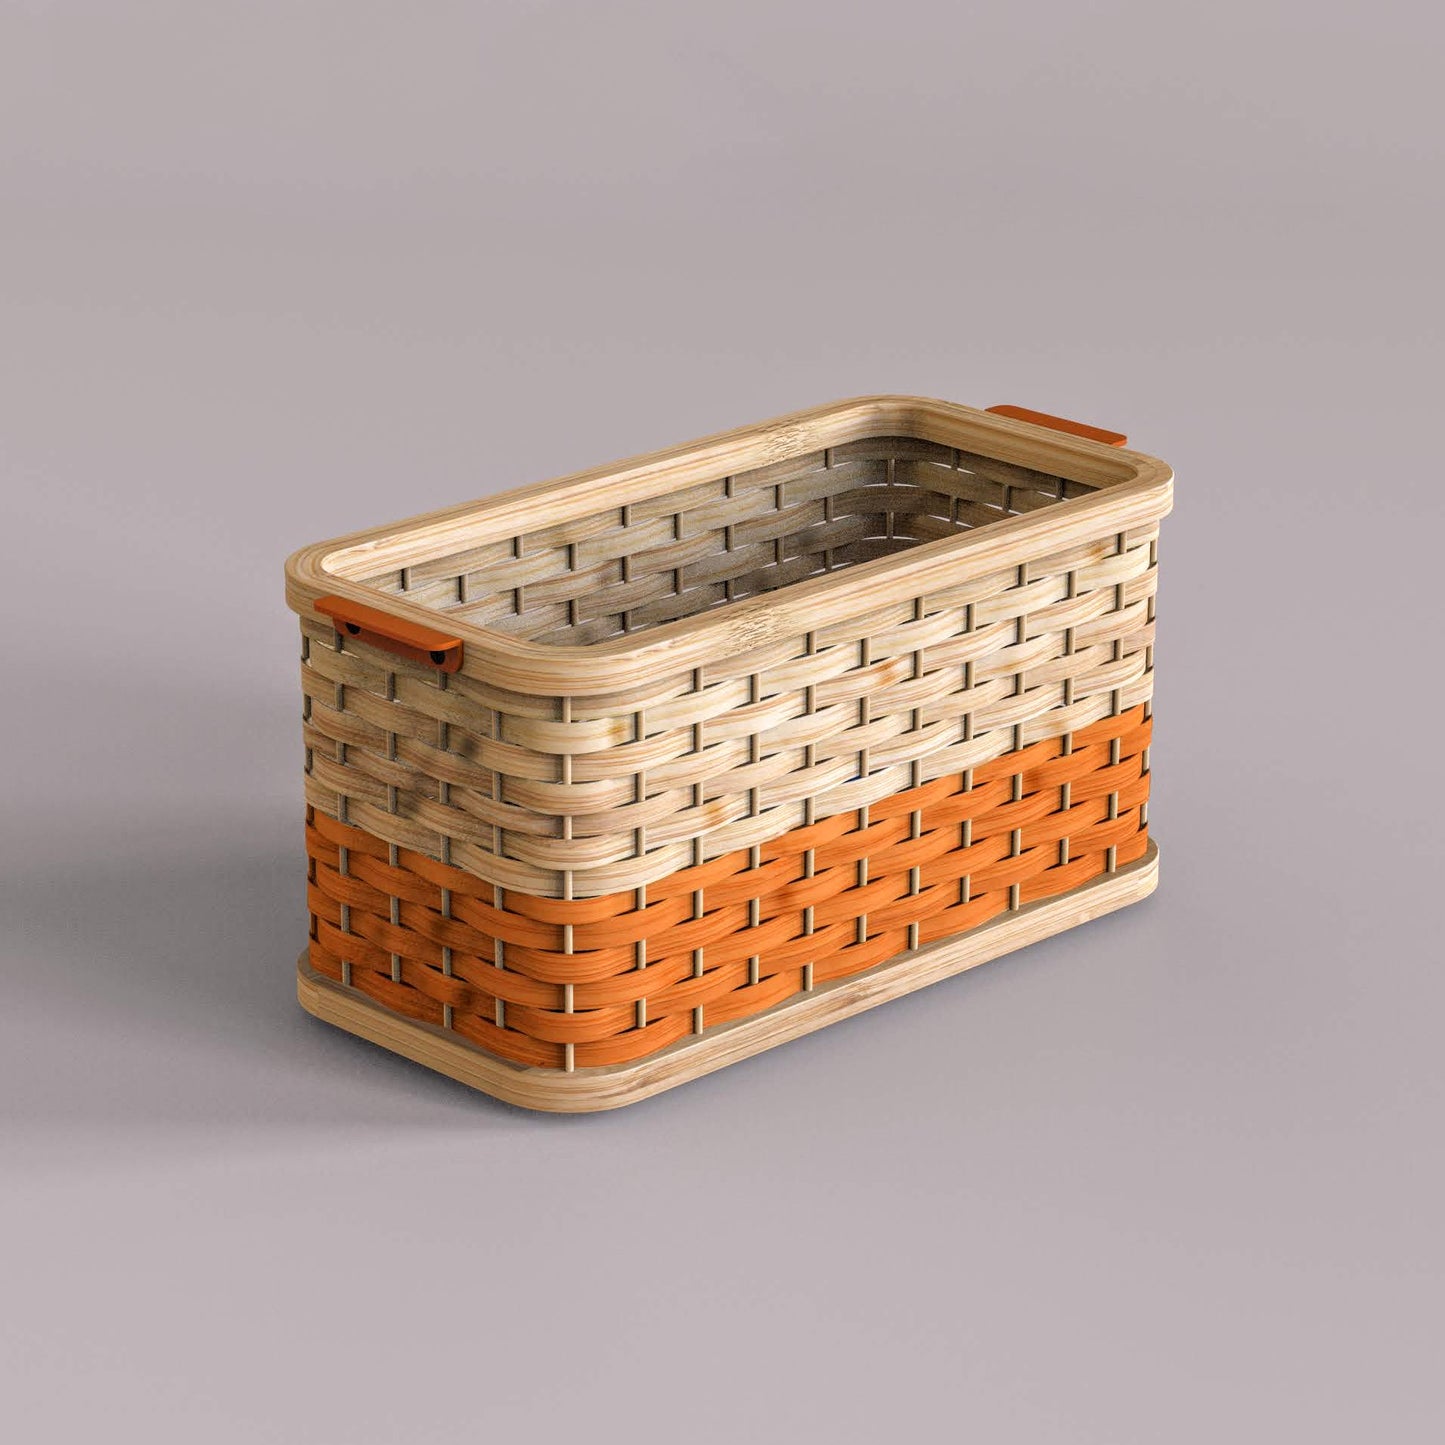 Stadium-Wicker Handwoven Storage Basket Shelf Basket Colorful Cane Bamboo Basket for Home Corporate Gifting